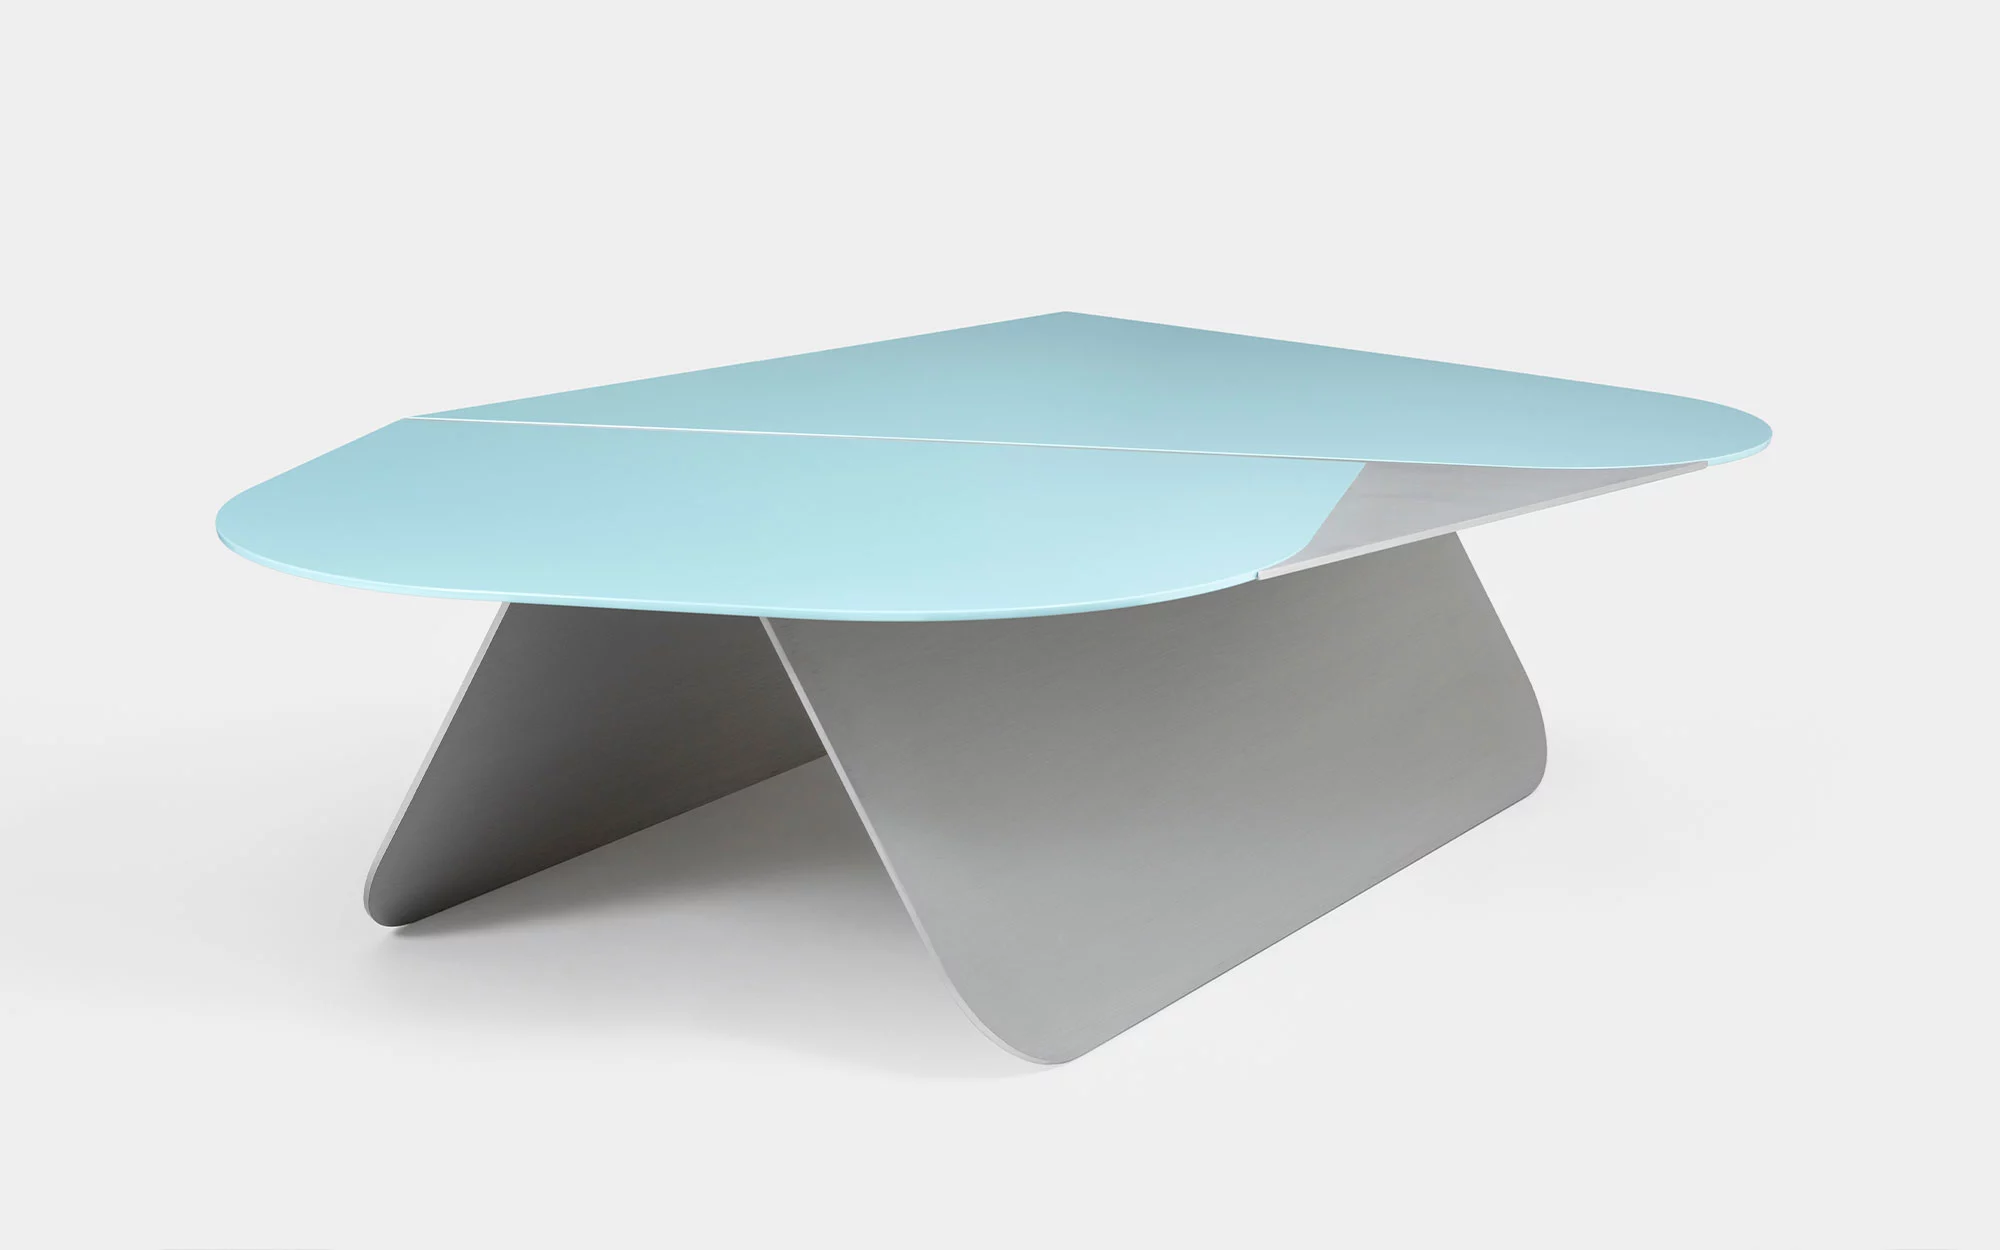 Large DB Coffee Table - Pierre Charpin - @home new chapter.